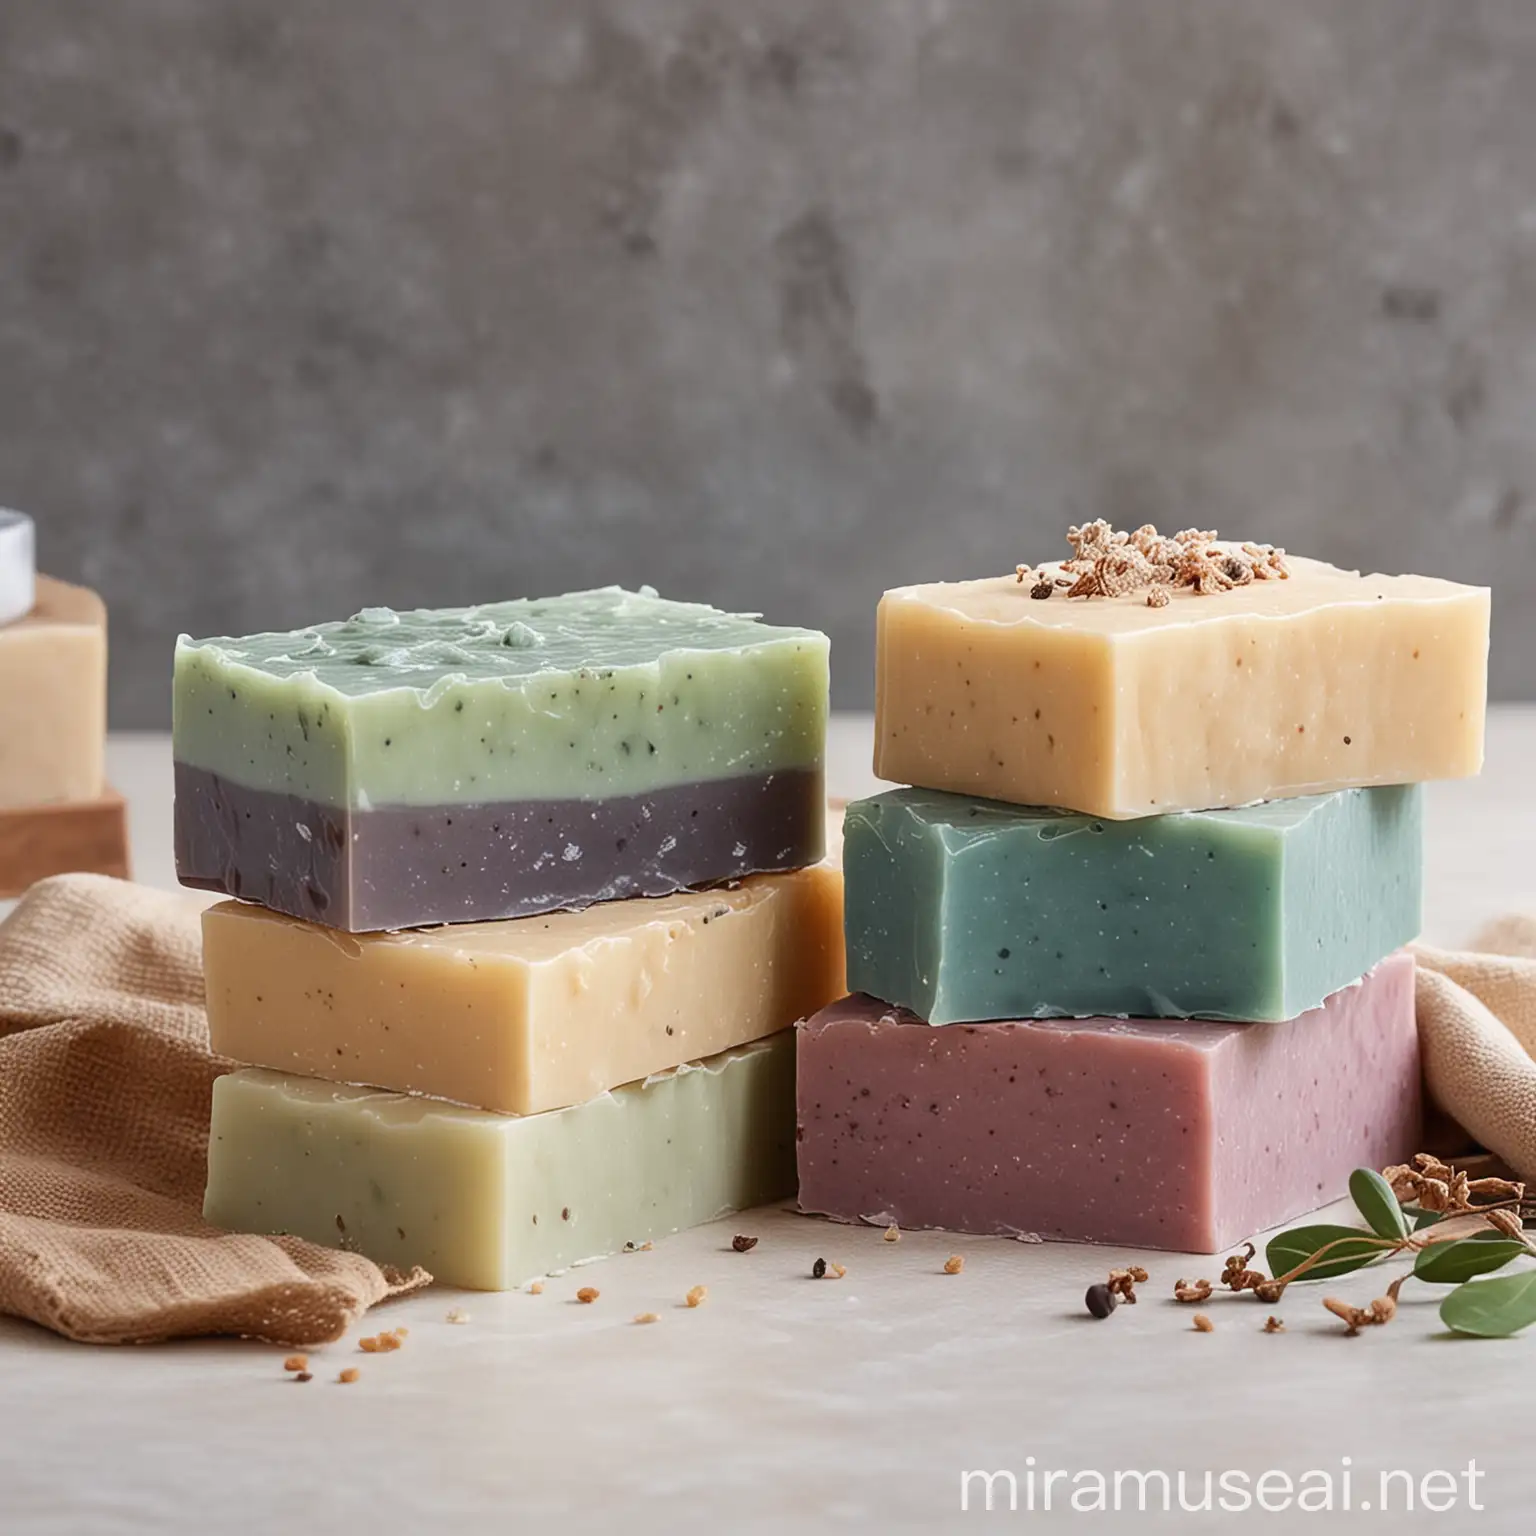 give me an image of five different handmade soaps in a spa setting 